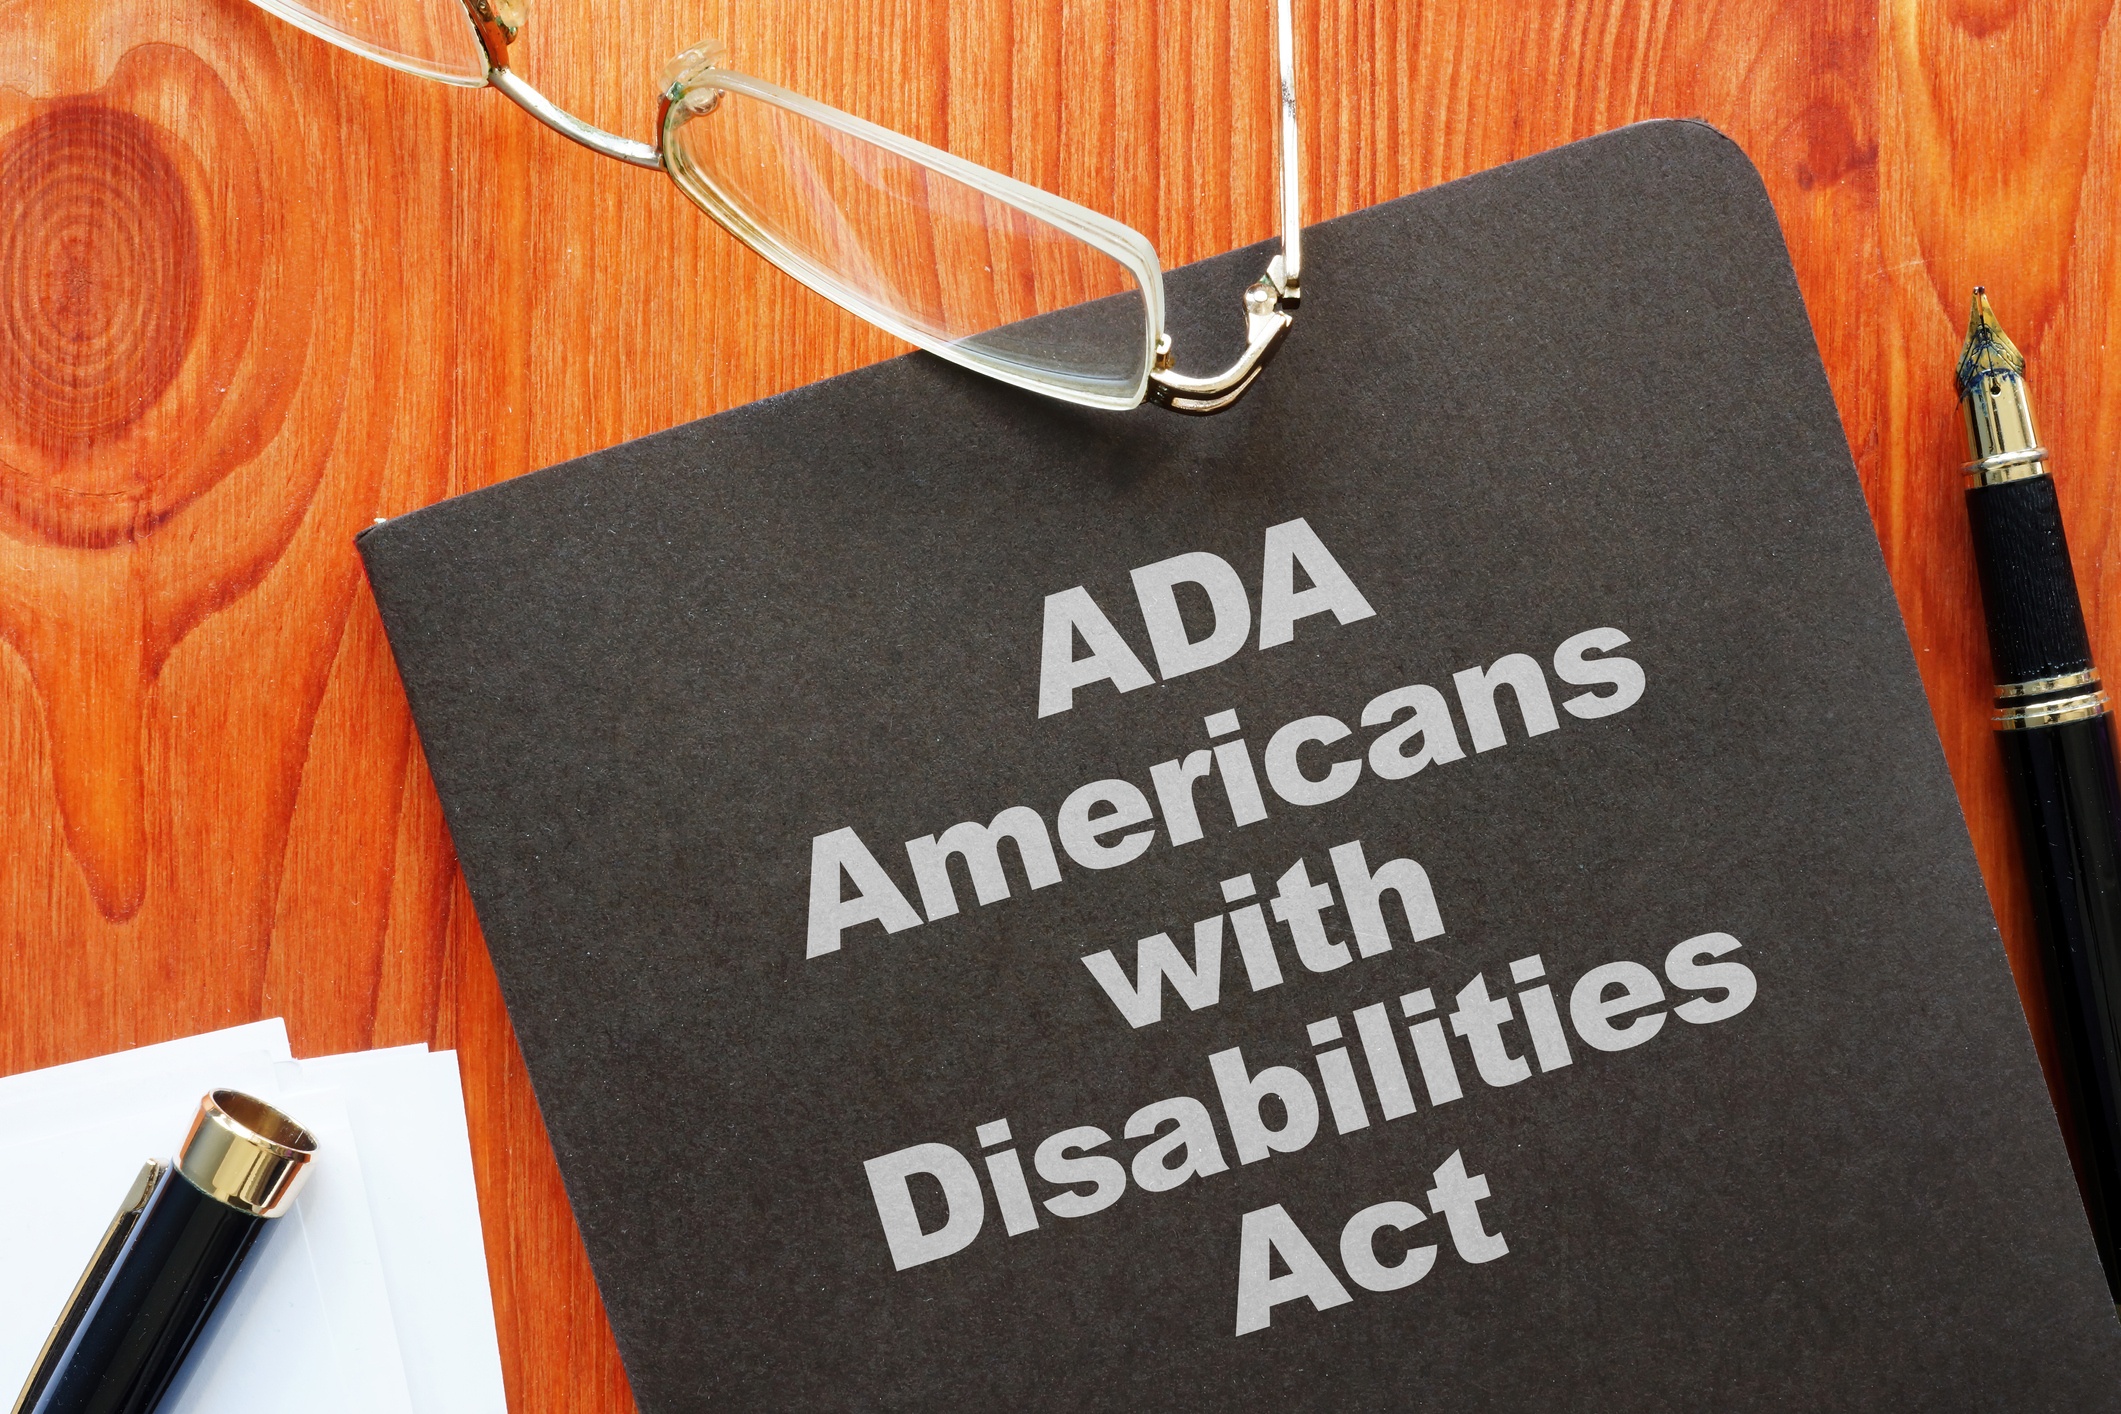 Americans with disabilities act, ADA, disabilities